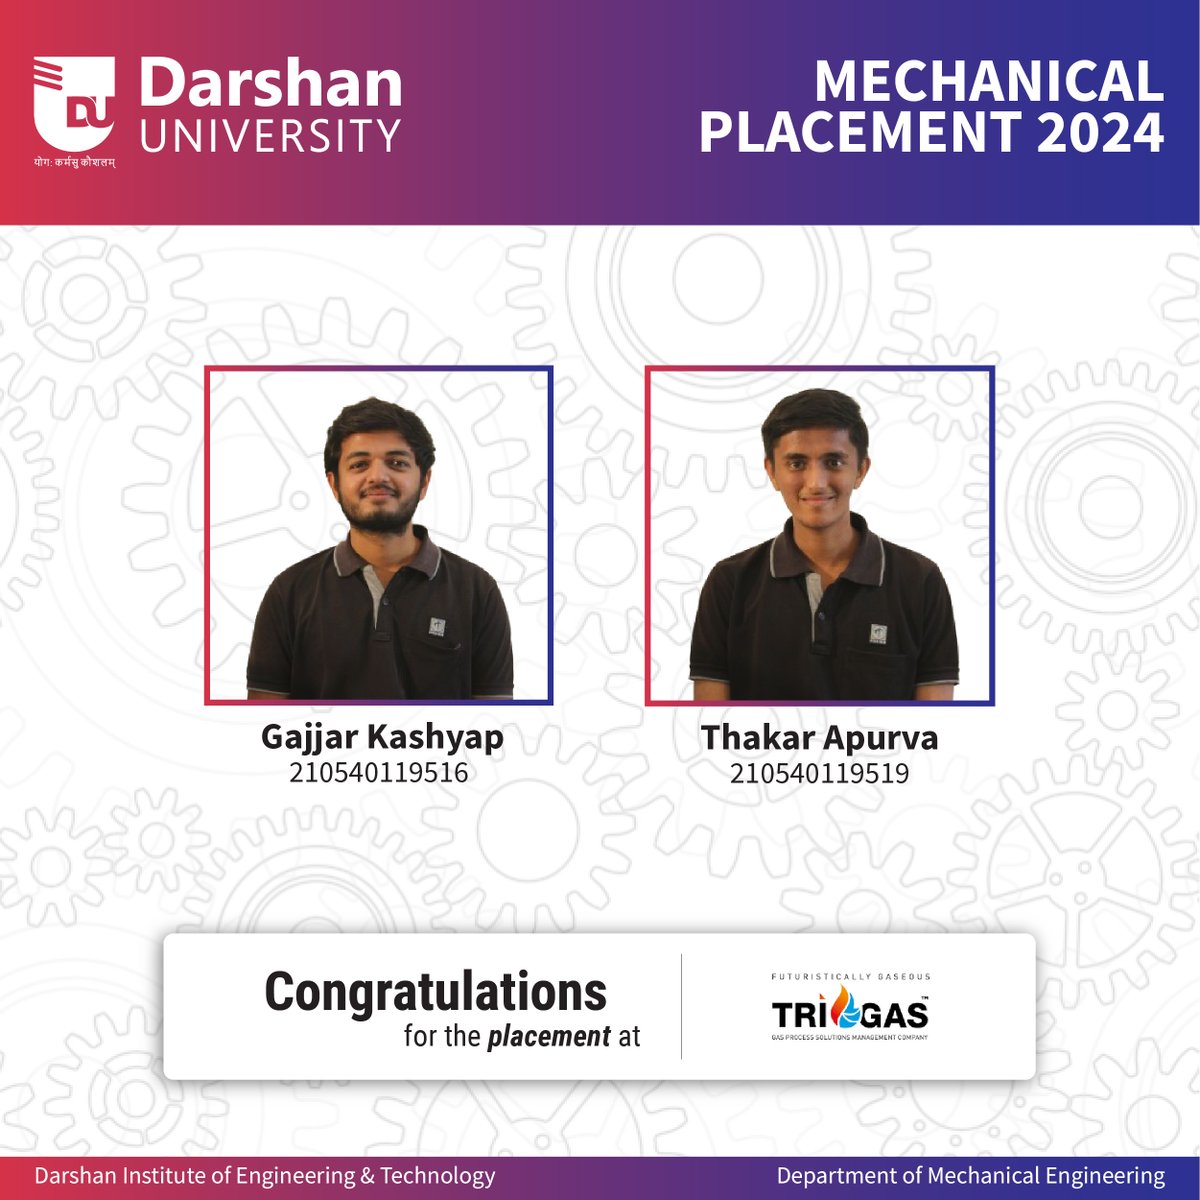 We're thrilled to announce a remarkable achievement from our esteemed Department of #Mechanical #Engineering at Darshan University! Their dedication, hard work, and passion have truly paid off.

#DarshanUniversity #DIET #ProudMoment #SuccessStories #FutureLeaders  #ProudMoment